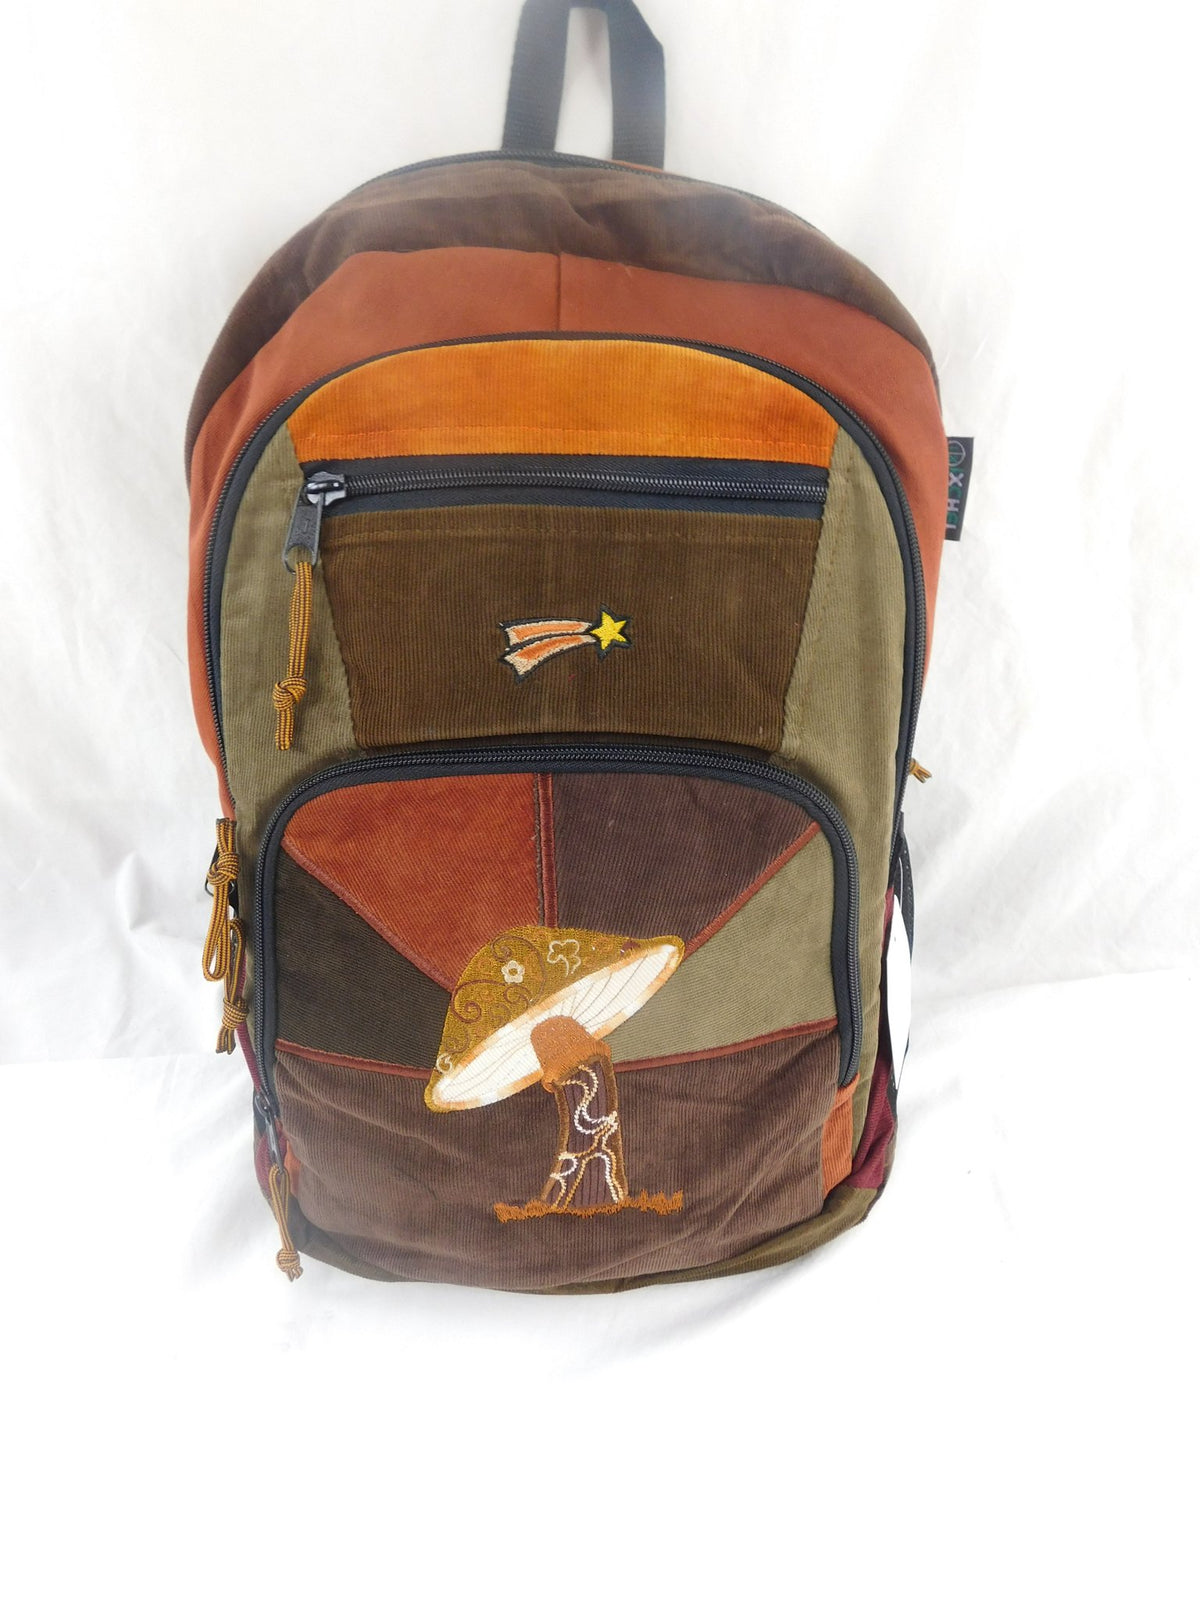 Patchwork Corduroy Backpack with Mushroom Applique